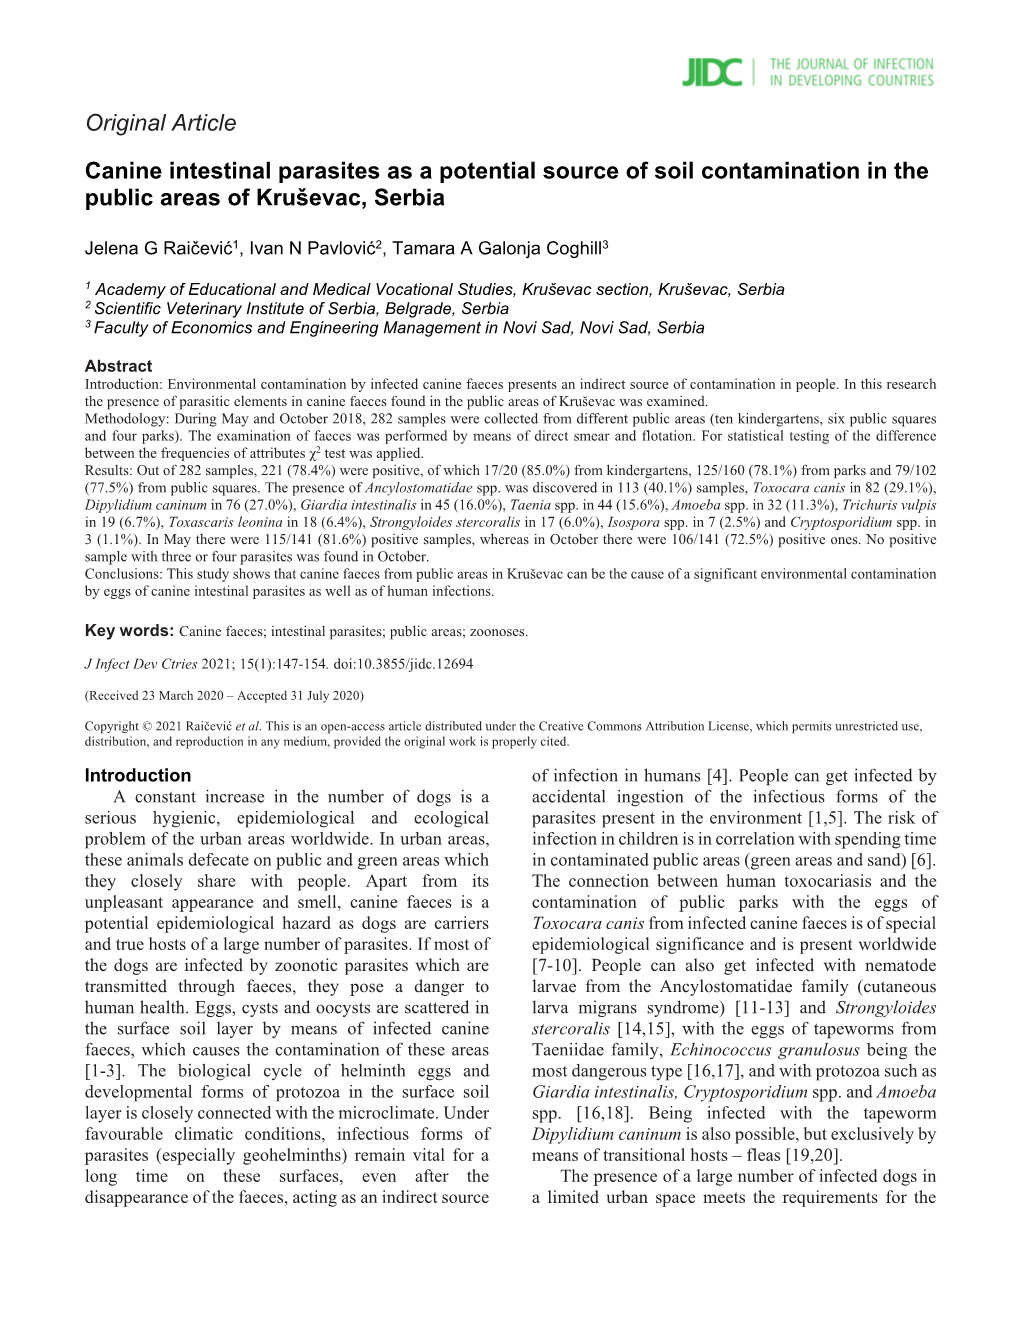 Original Article Canine Intestinal Parasites As a Potential Source of Soil Contamination in the Public Areas of Kruševac, Serbi